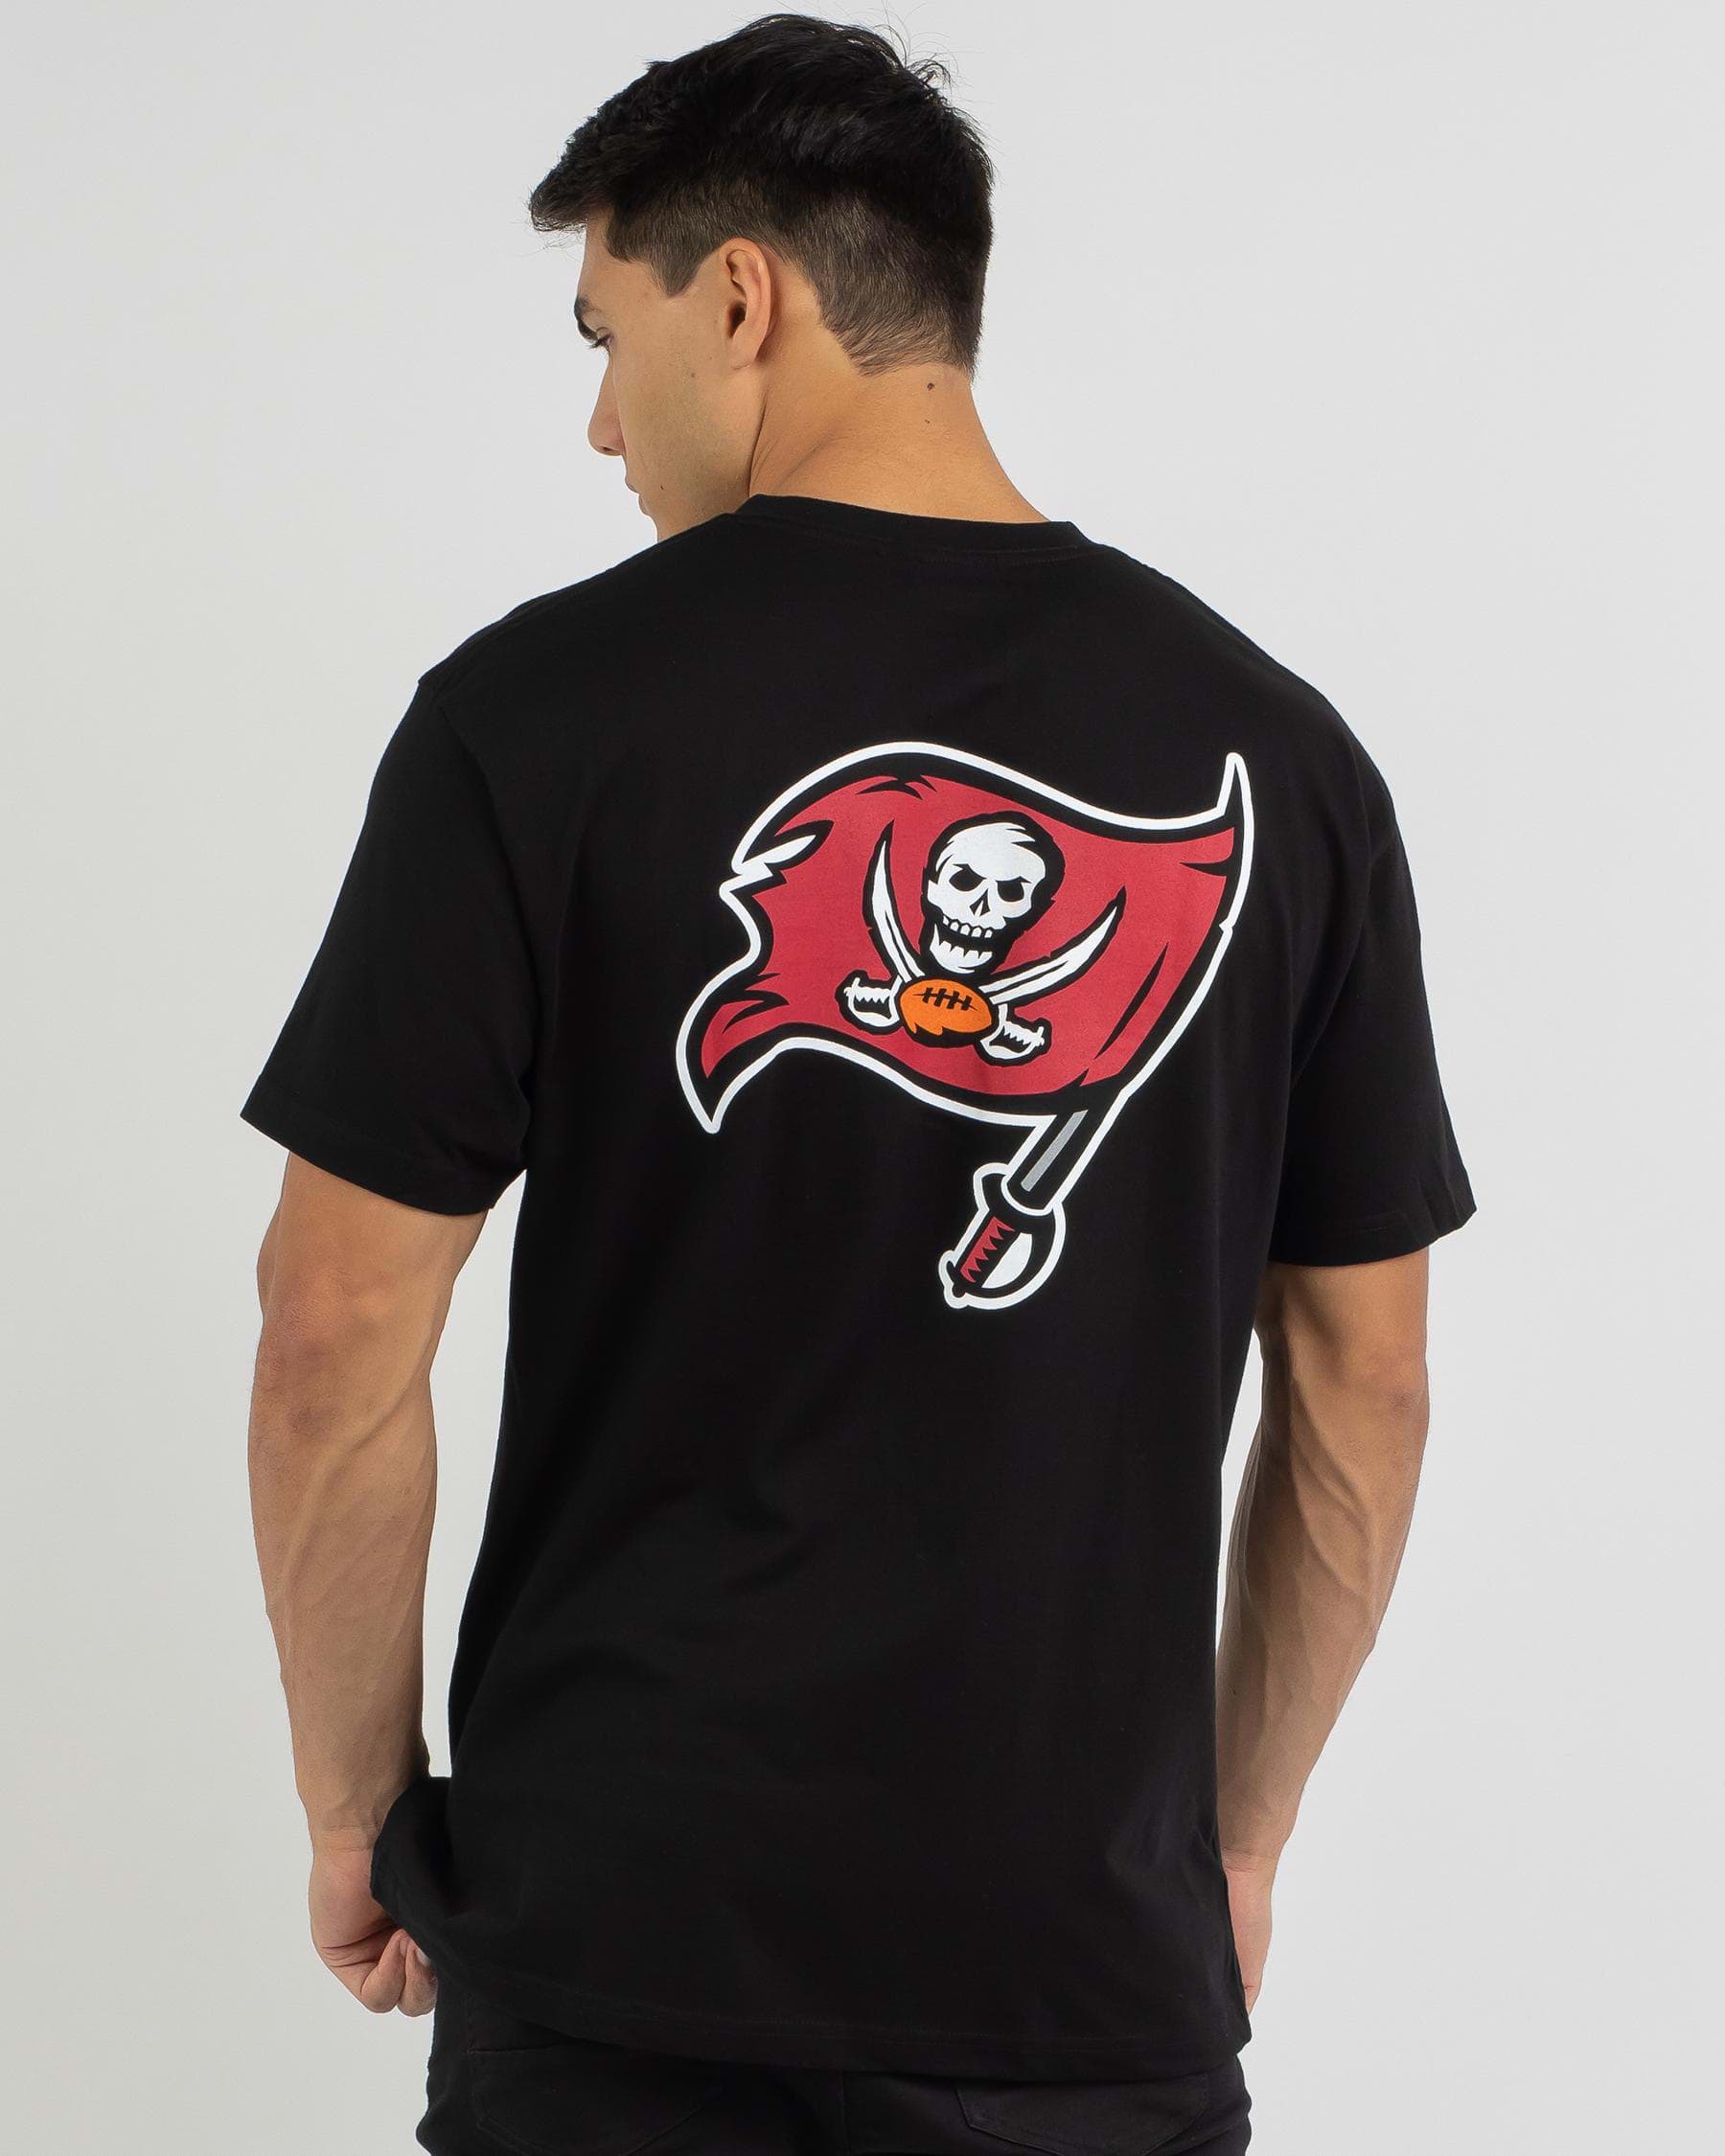 Mitchell & Ness NFL Retro Buccaneers Retro T-Shirt In Black - Fast Shipping  & Easy Returns - City Beach United States